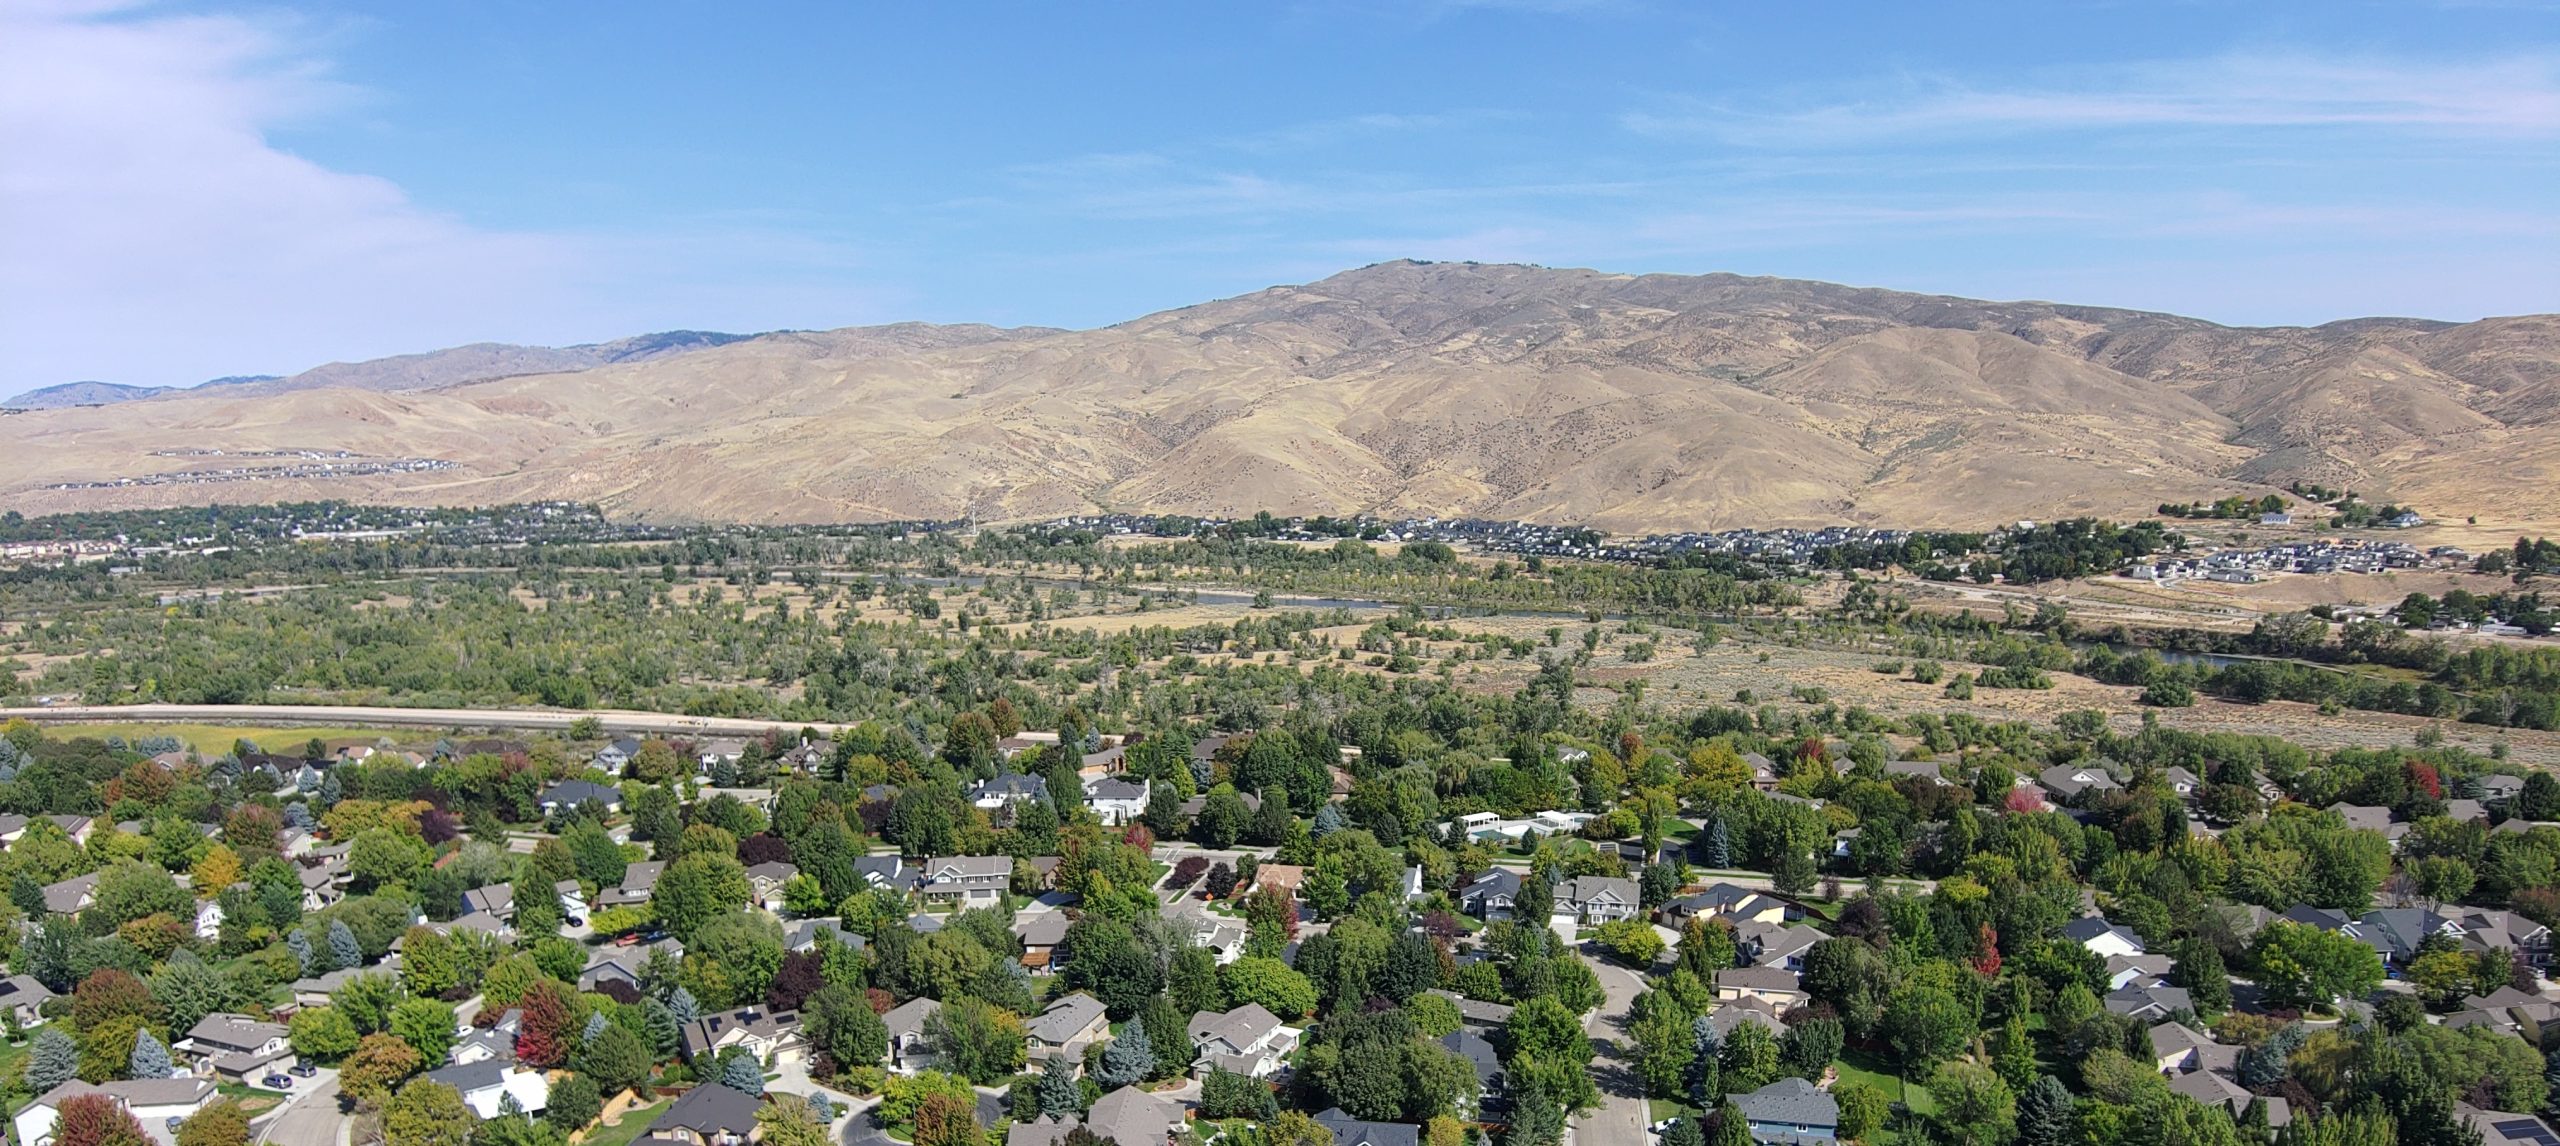 Image is an aerial view of a Boise, ID neighborhood with mountains in the background.